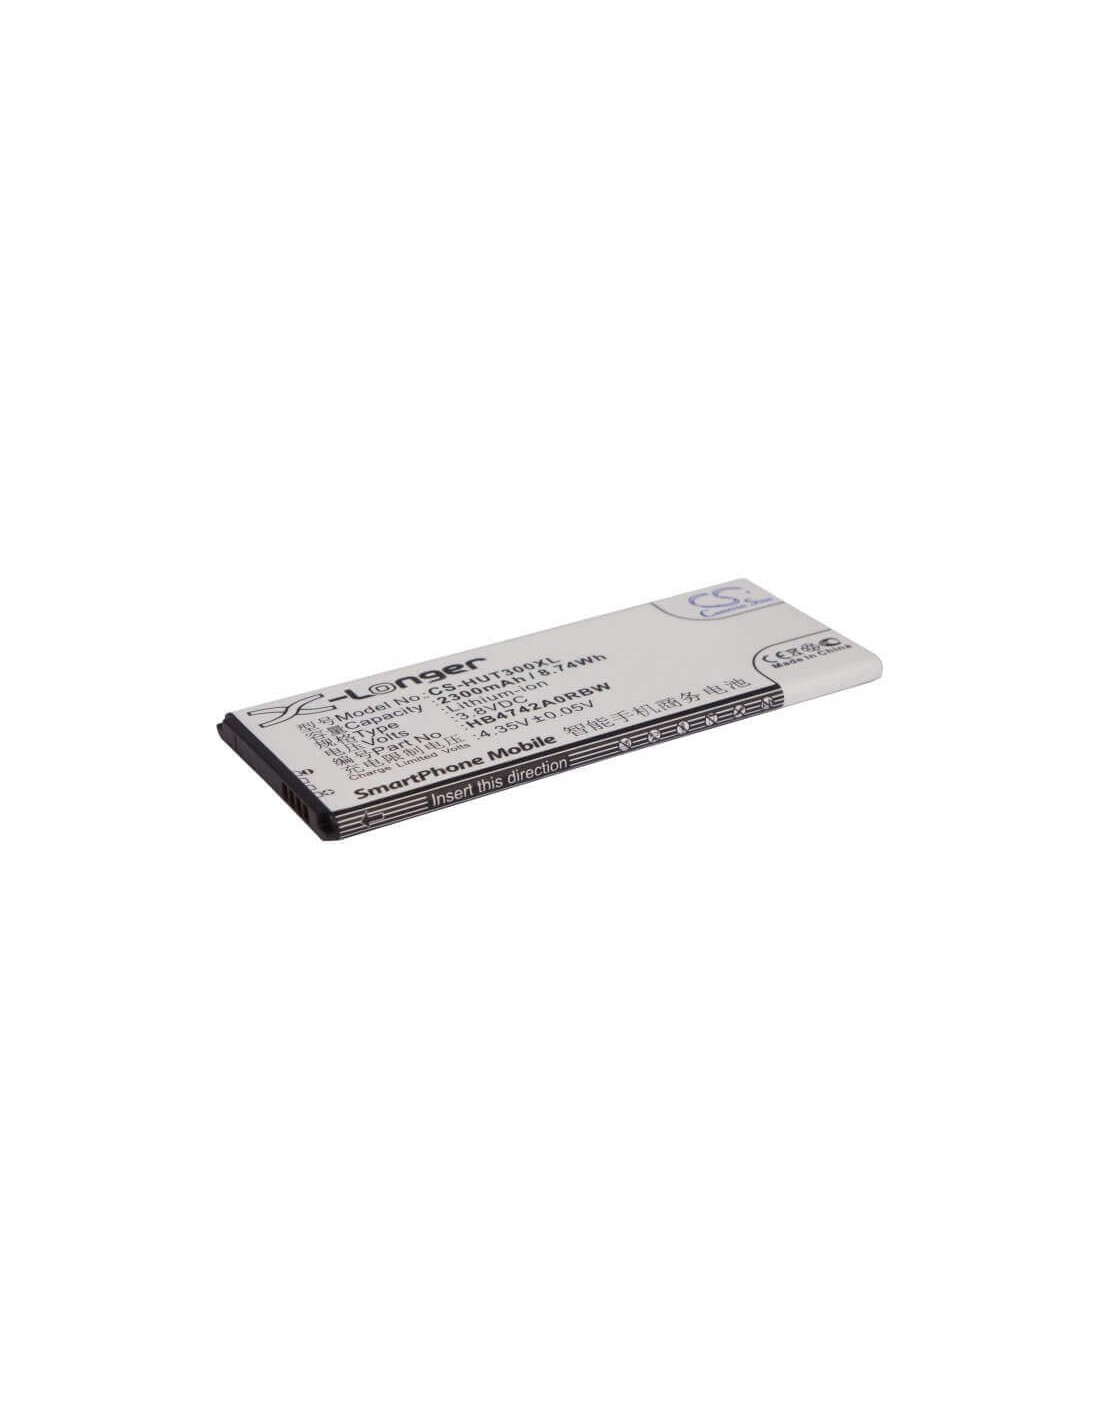 Battery for Huawei Ascend G730, Honor 3C, H30-T00 3.8V, 2300mAh - 8.74Wh